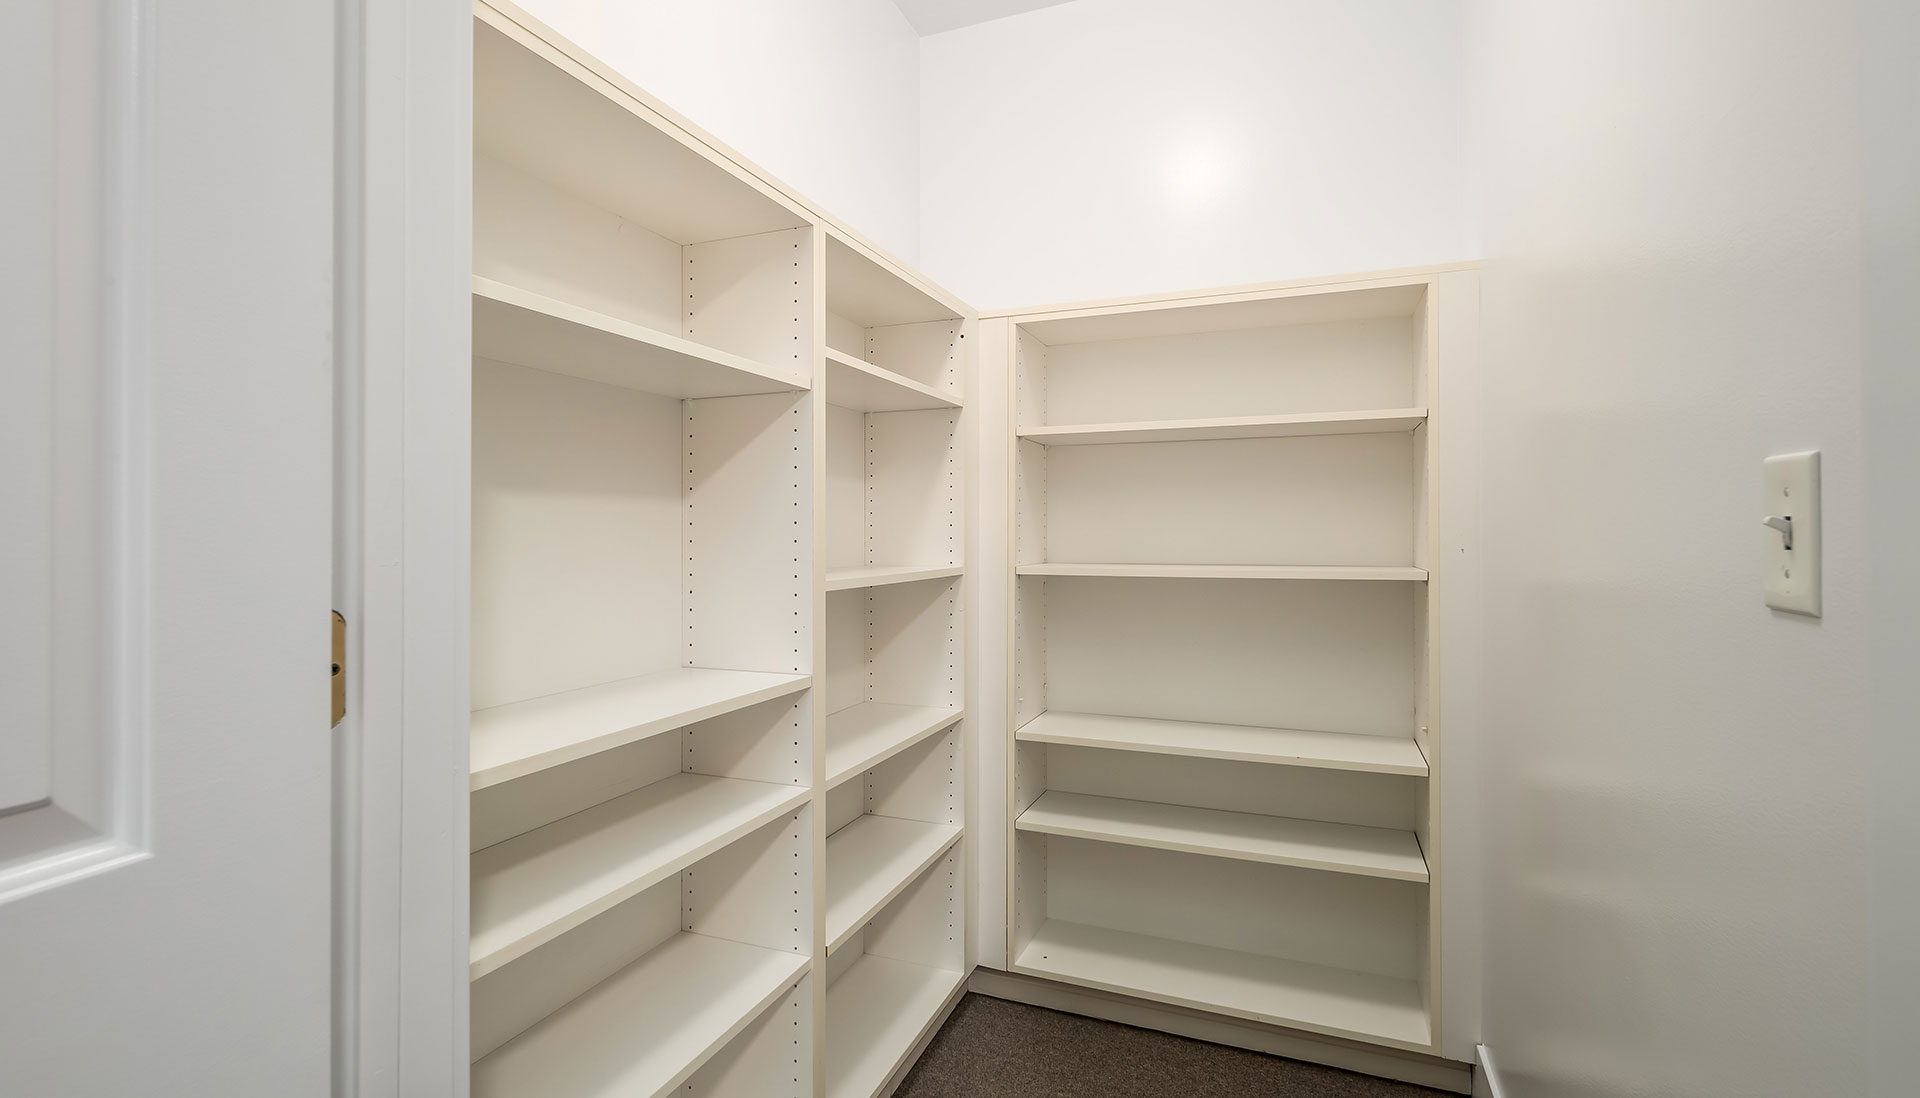 Built in shelving space